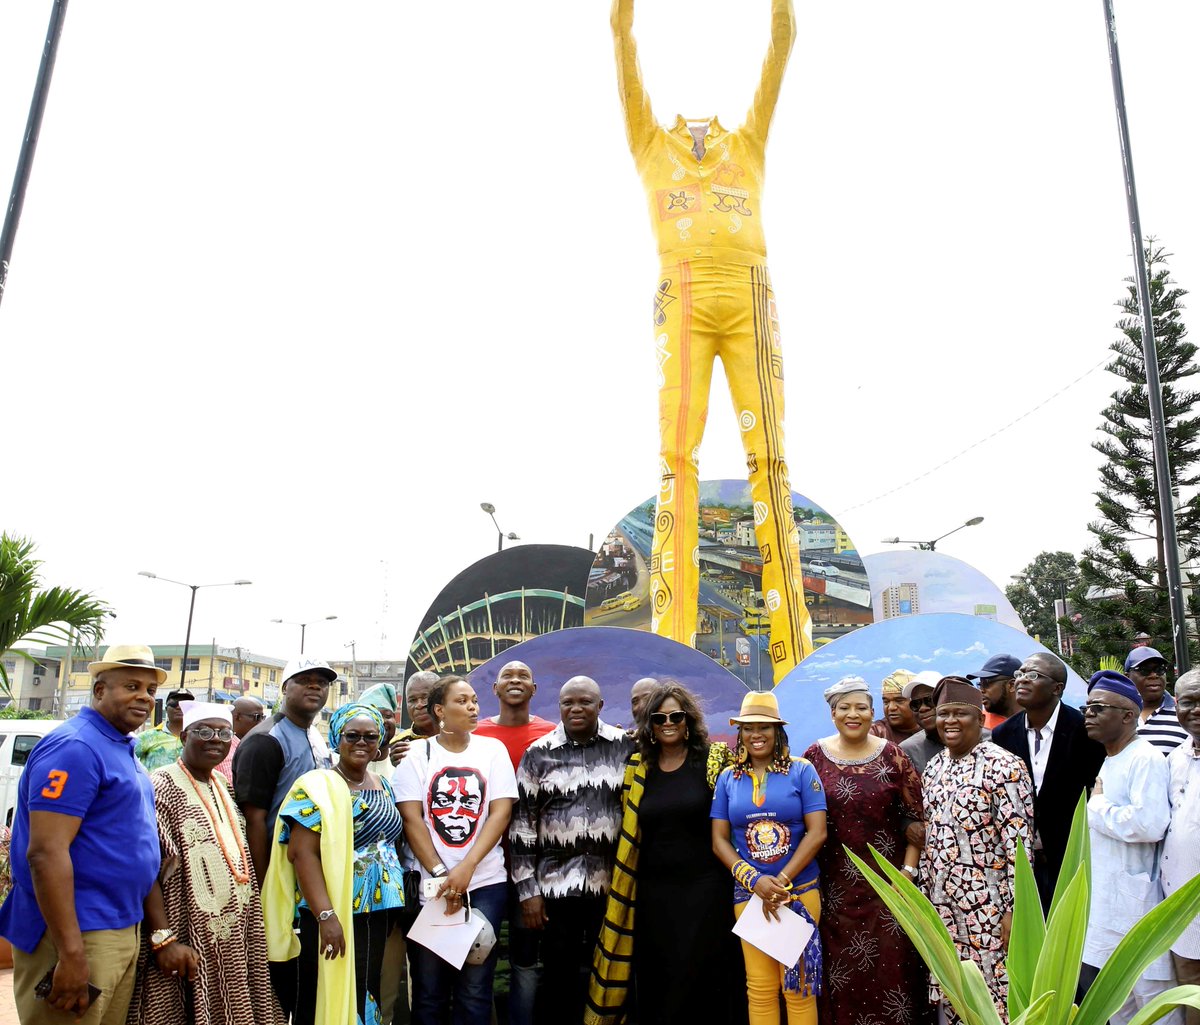 Lagos State Governor Akinwunmi at the unveiling of the unveiling of the Liberation Statue in honour of Fela Kuti at Allen Roundabout in Ikeja, Lagos [The Lagos State Govt/Twitter] 